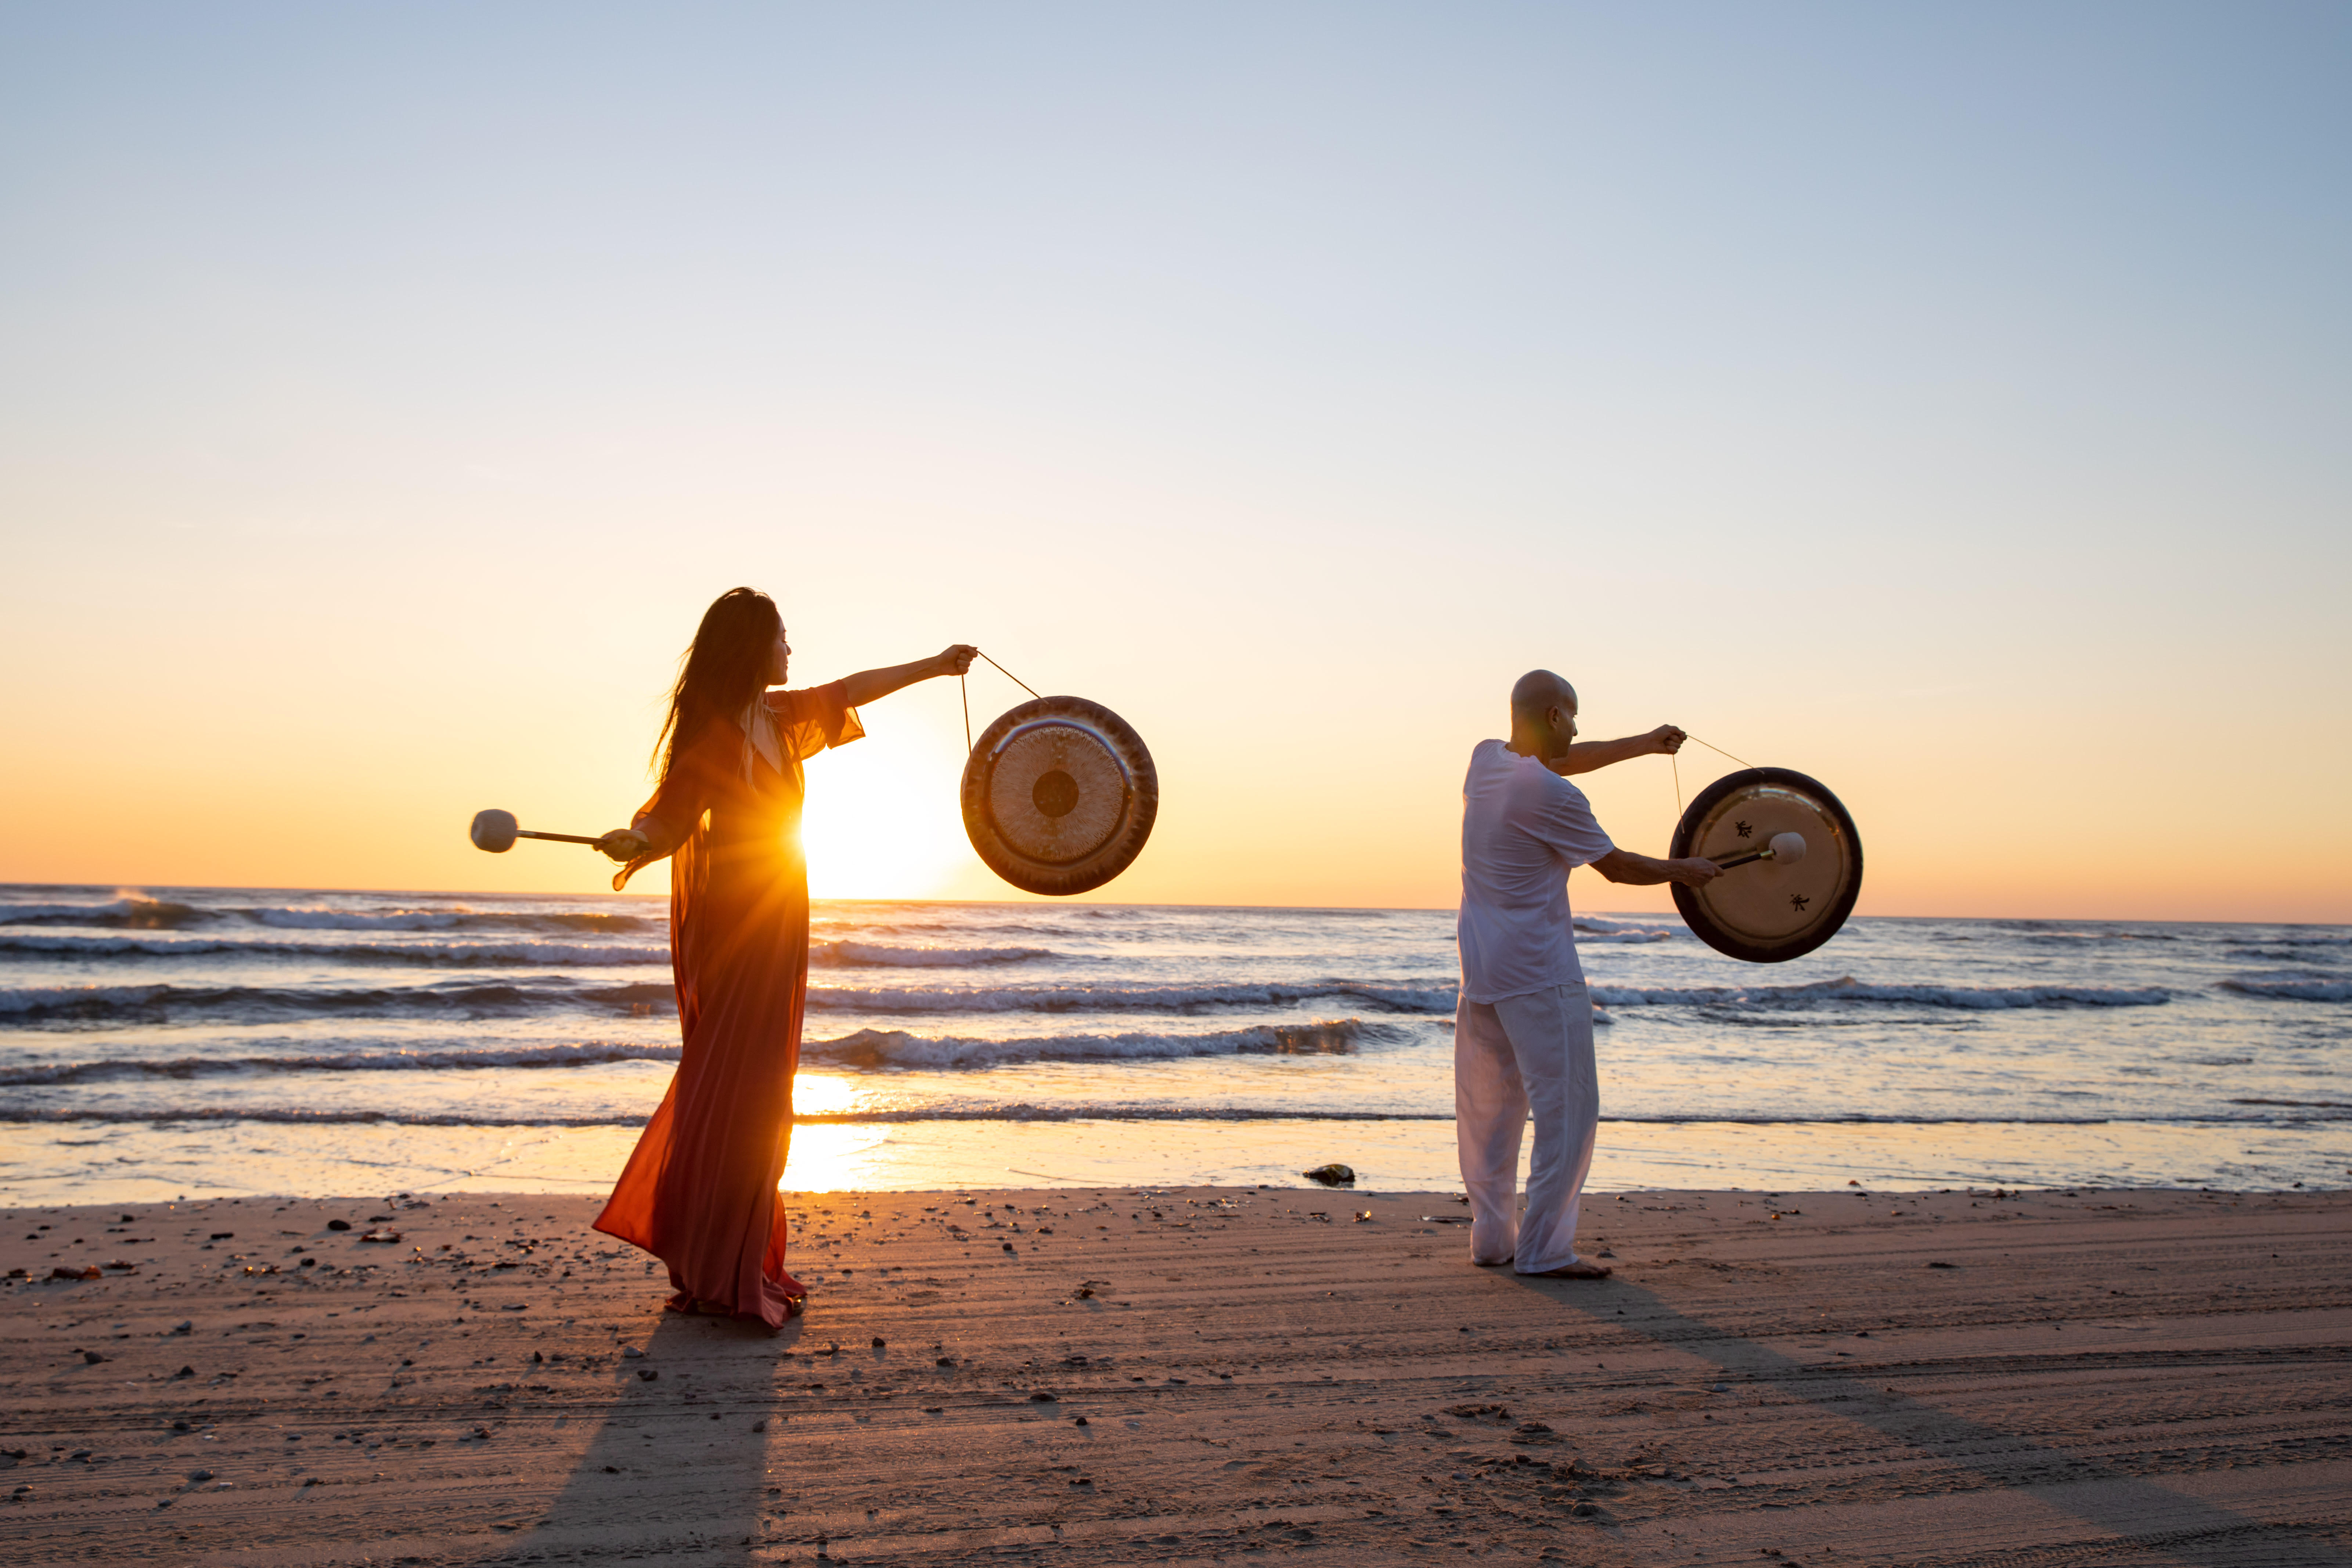 Join Shanti Sounds for Yoga and Healing Sound at Blue Spirit Costa Rica